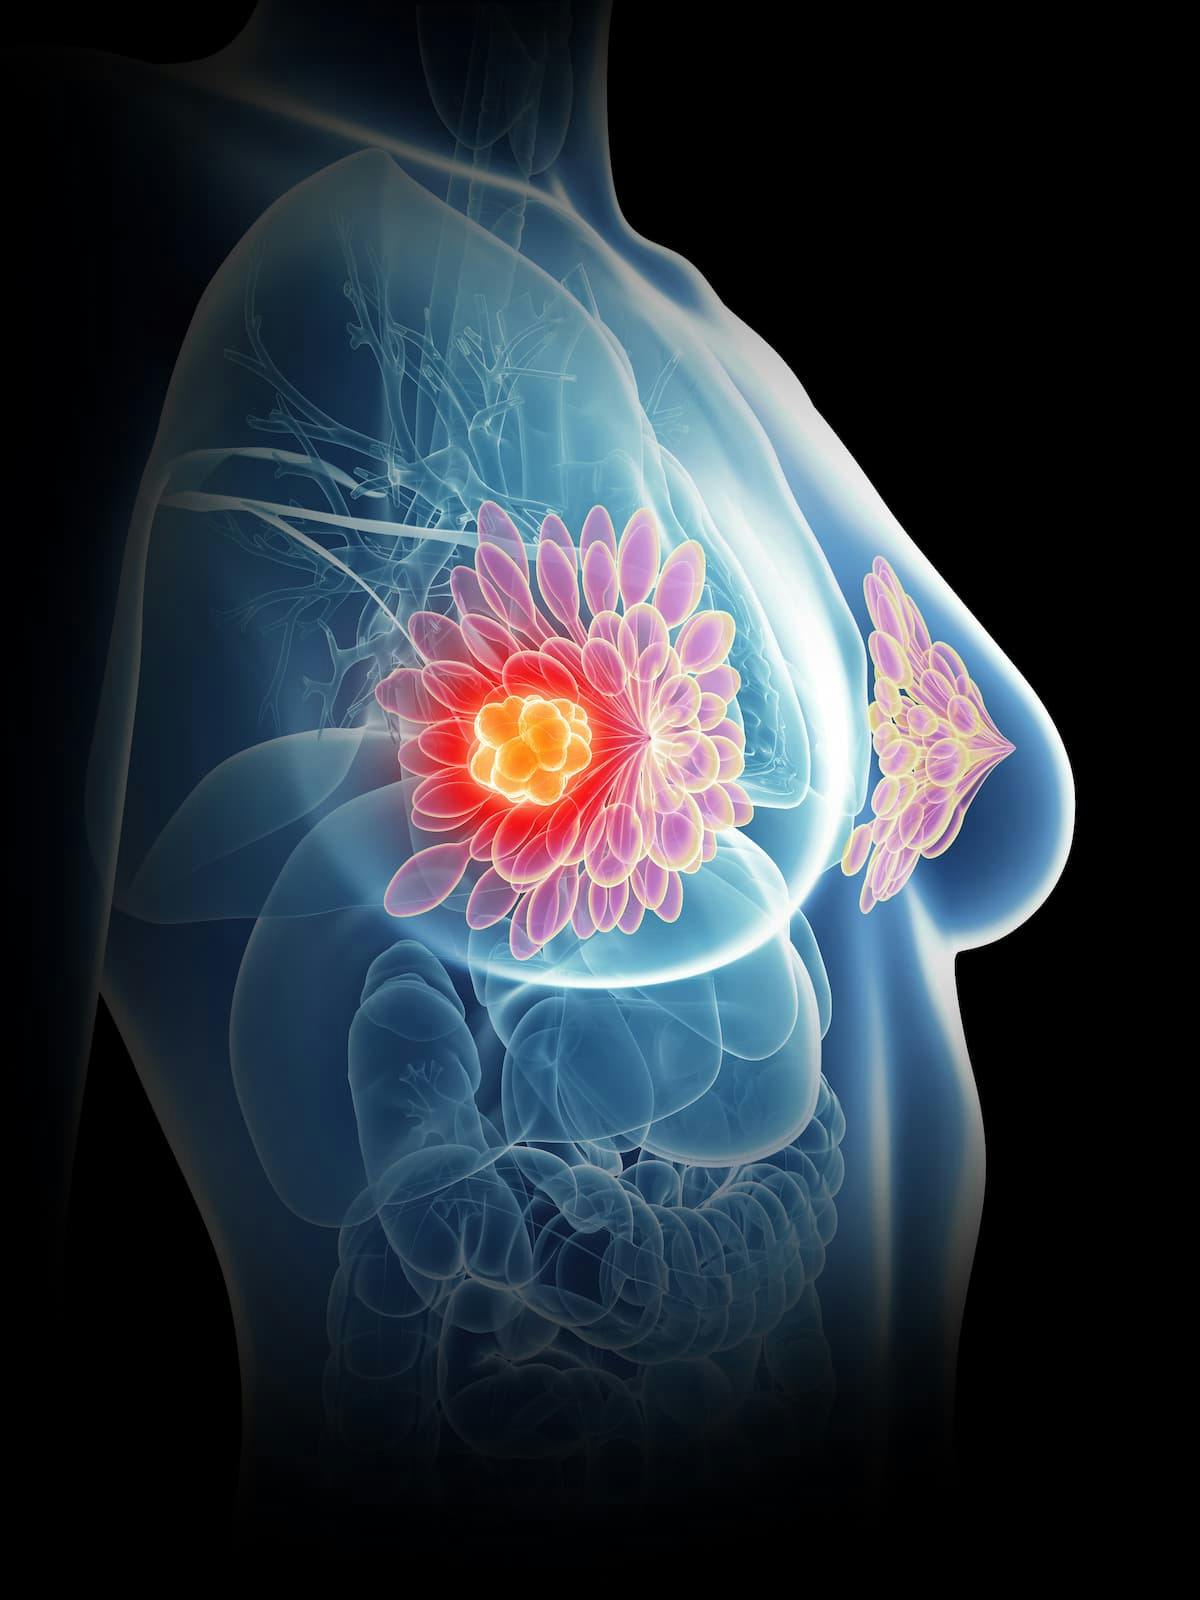 Data from the phase 3 TROPION-Breast01 trial support datopotamab deruxtecan as a potential treatment option for patients with endocrine-resistant, hormone receptor–positive, metastatic breast cancer, says Aditya Bardia, MD, MPH.